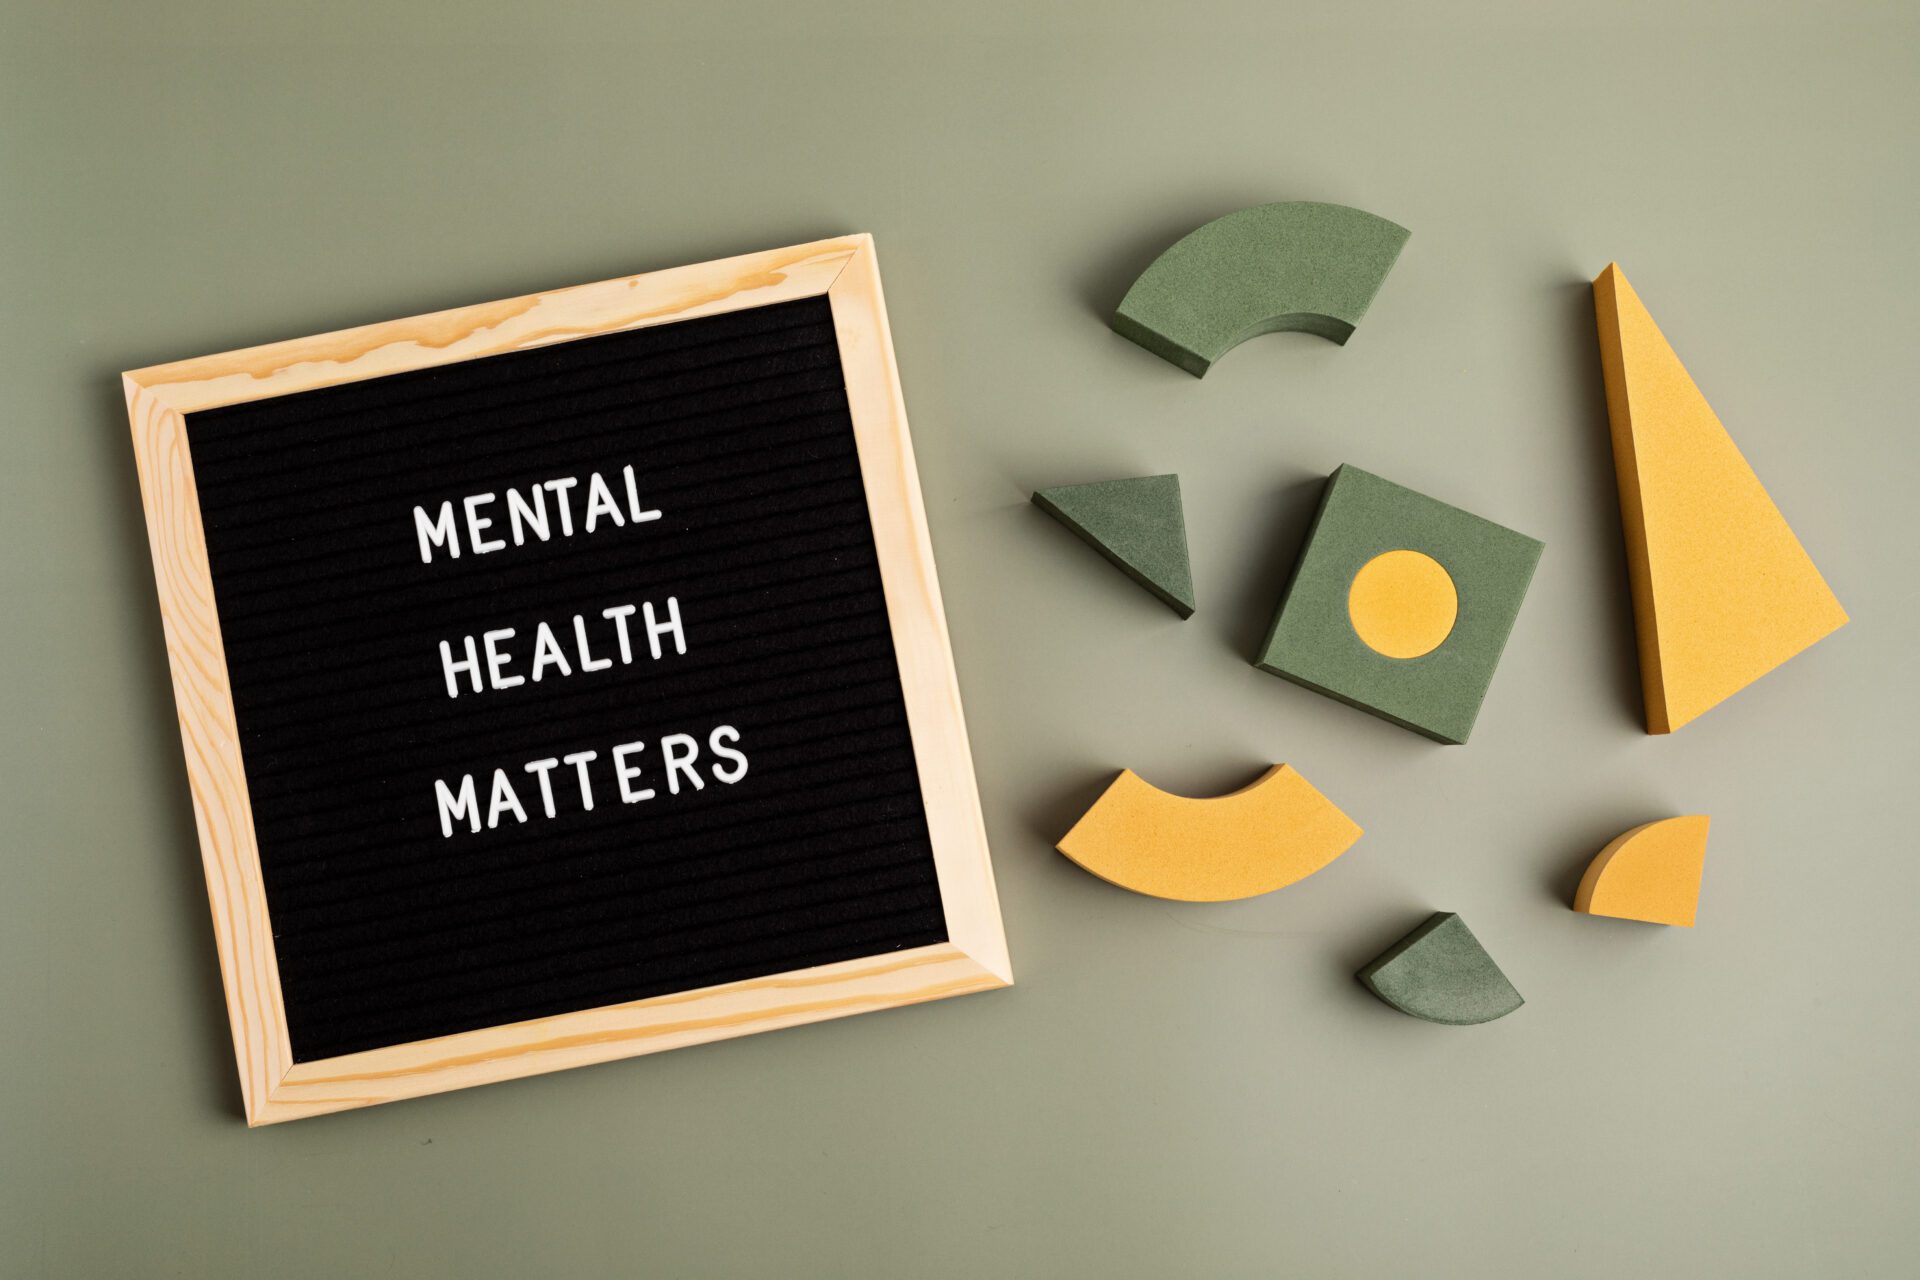 Mental health matters motivational quote on the letter board. Inspiration psycological text with geometric shapes